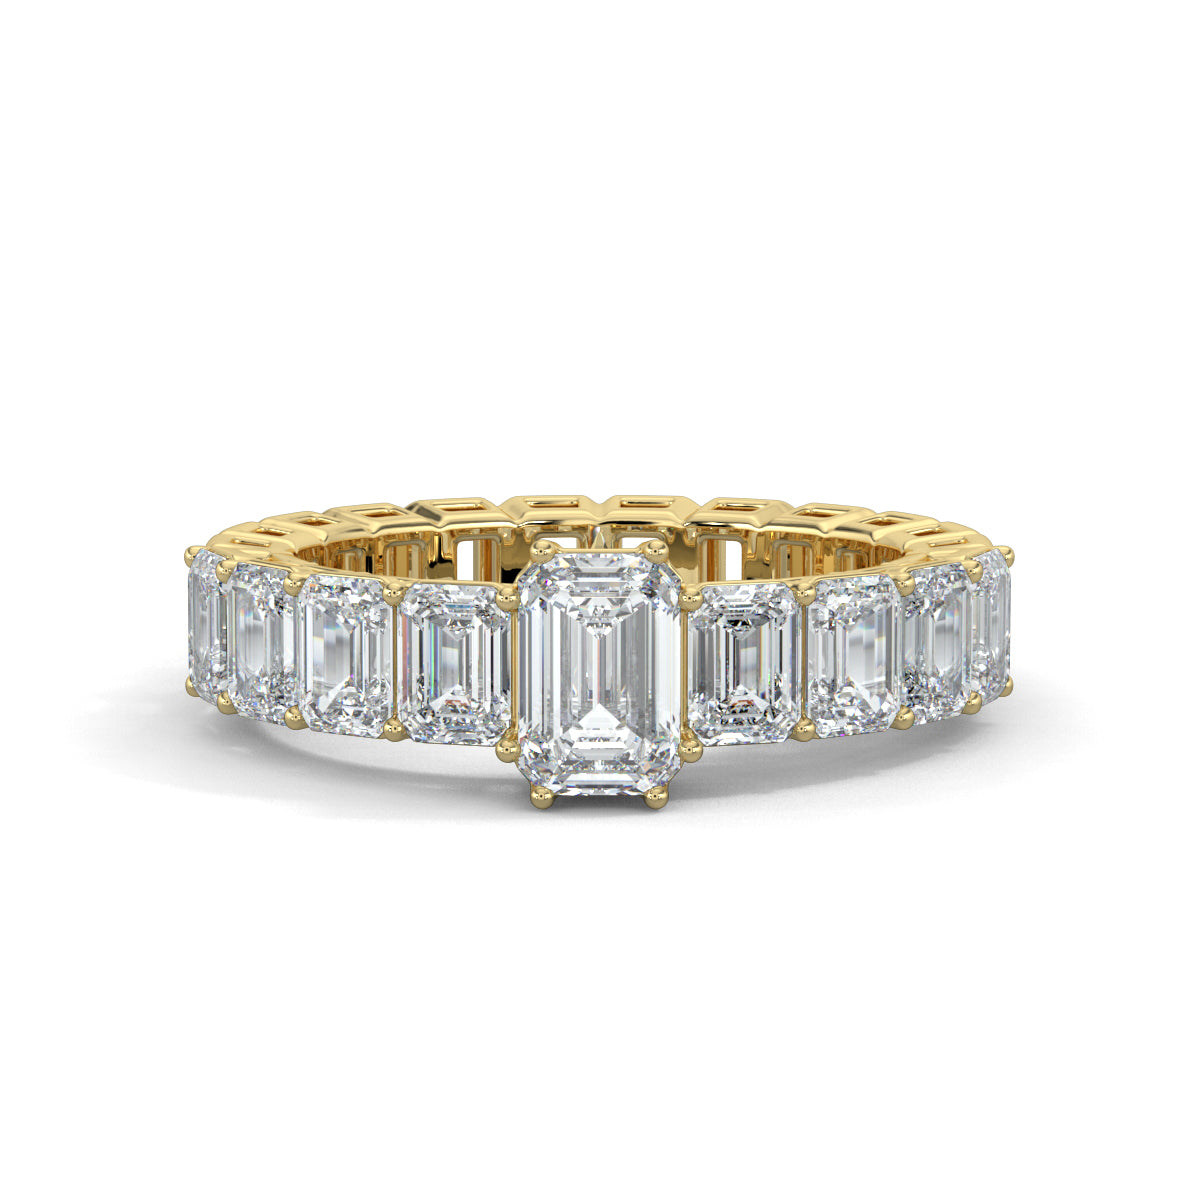 Yellow Gold, Diamond Ring, Exquisite Emerald Eternity Band, Natural Diamonds, Lab-Grown Diamonds, Gallery-Normal Band, Emerald Solitaire, Eternity Band, Emerald shape Ring